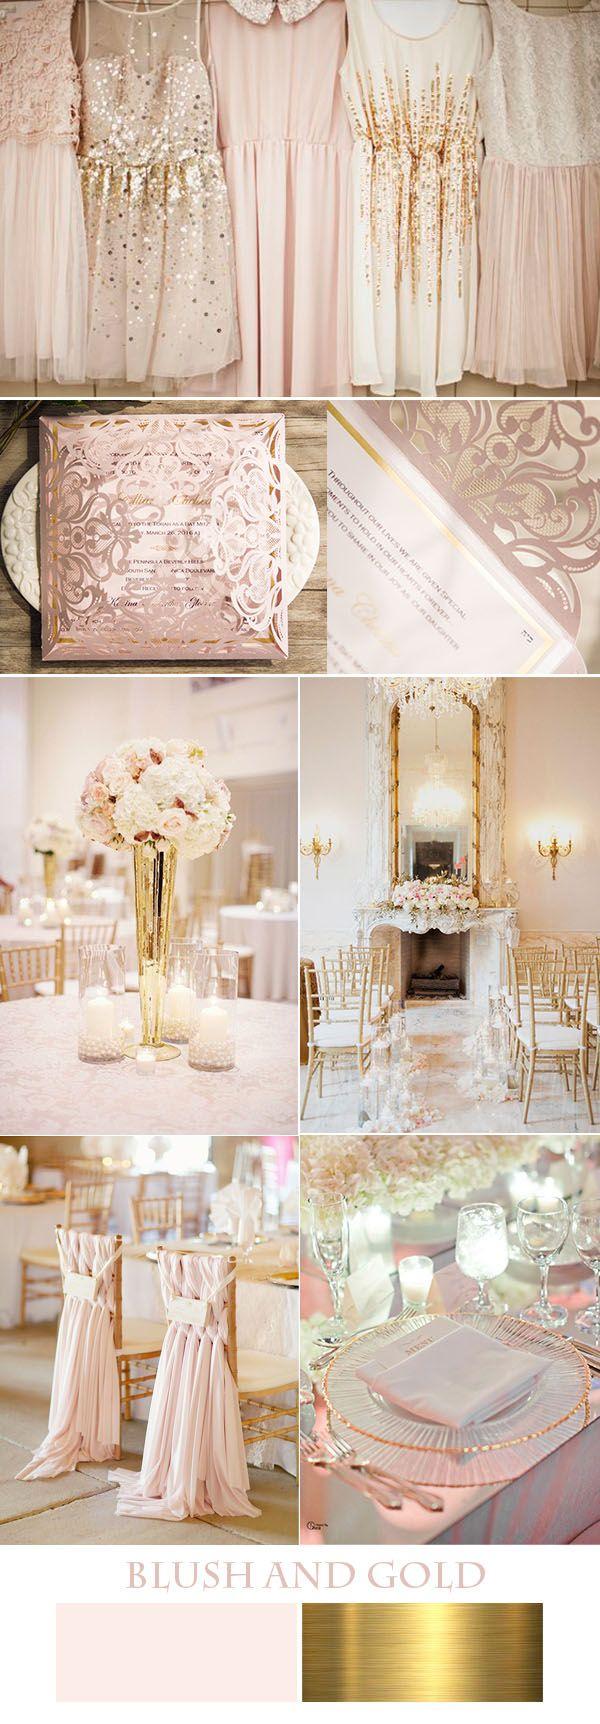 Wedding - Beautiful Foil Invitations With Inspired Wedding Color Ideas